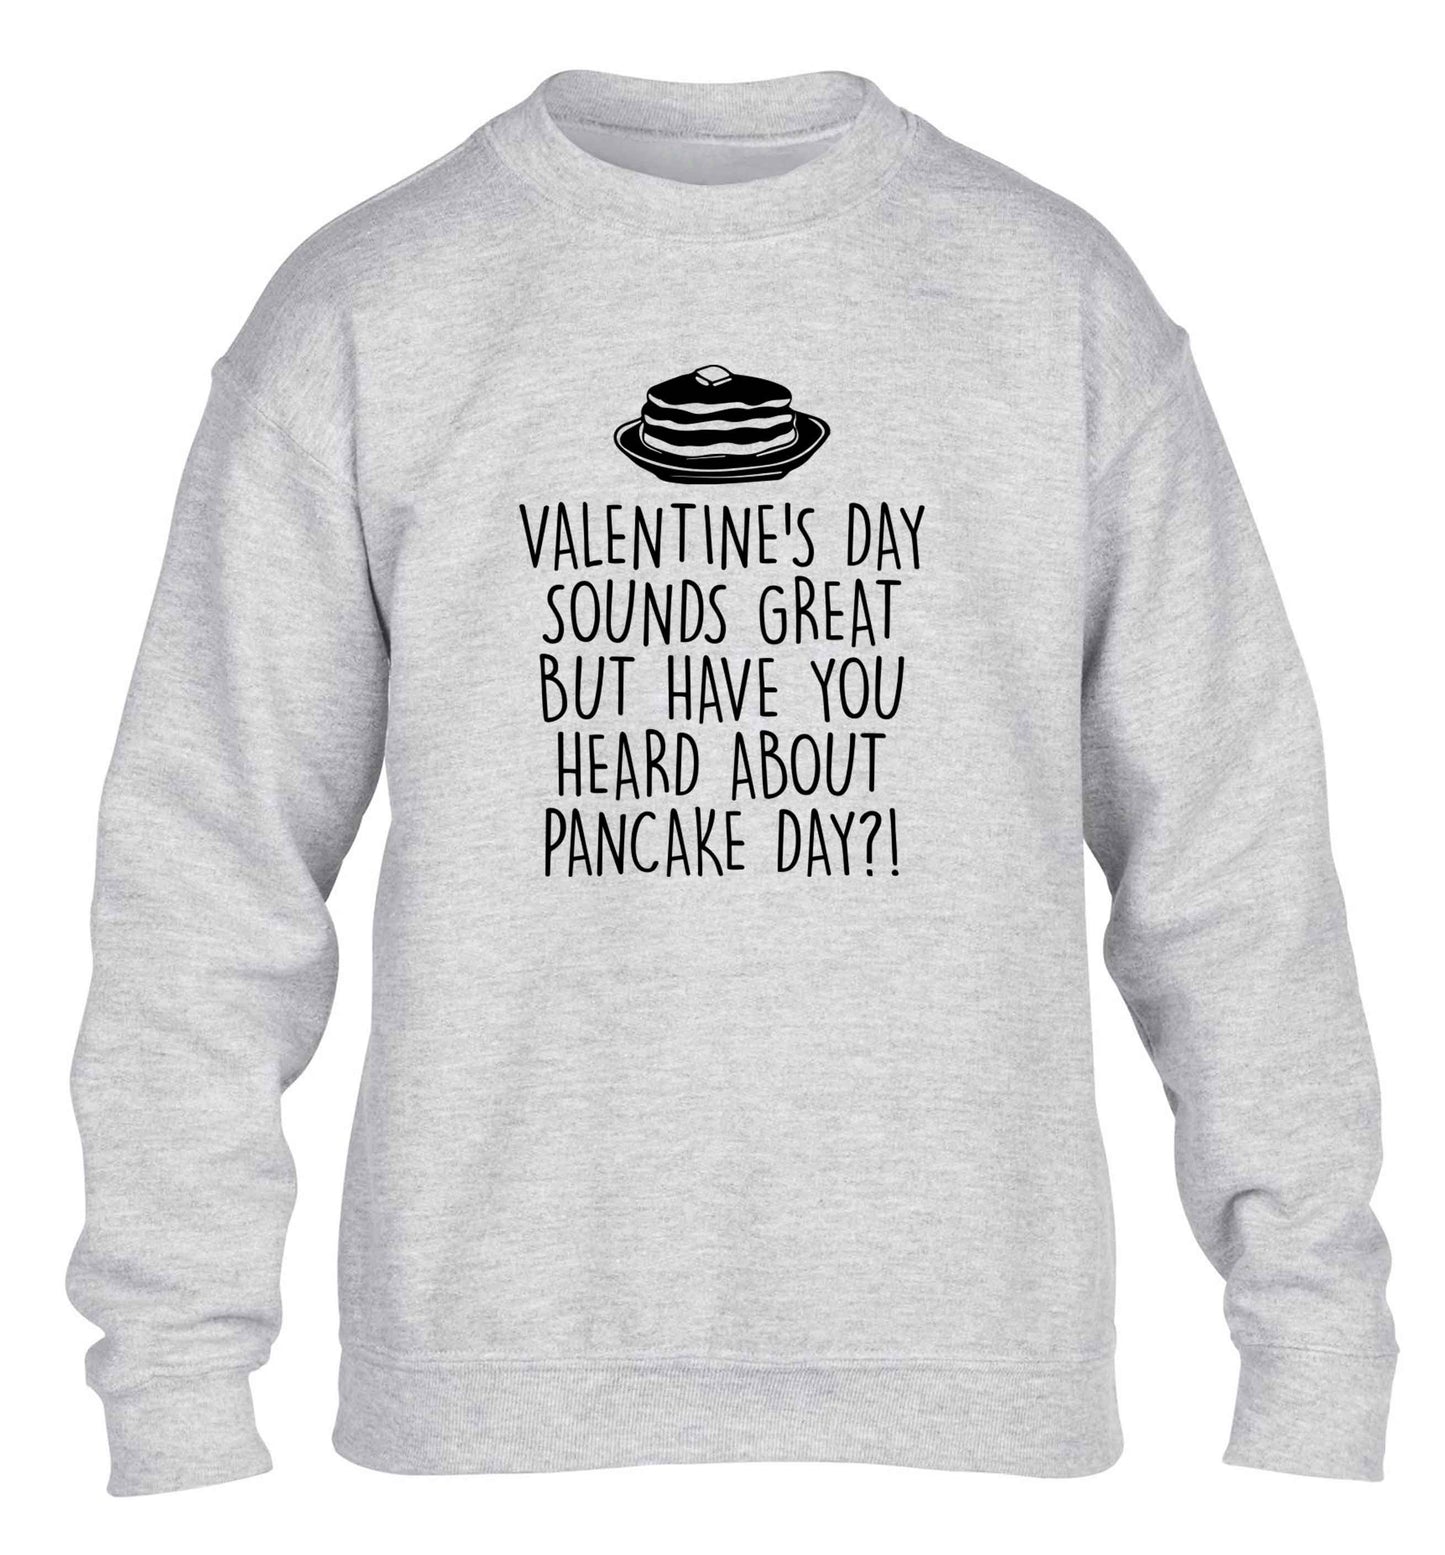 Valentine's day sounds great but have you heard about pancake day?! children's grey sweater 12-13 Years